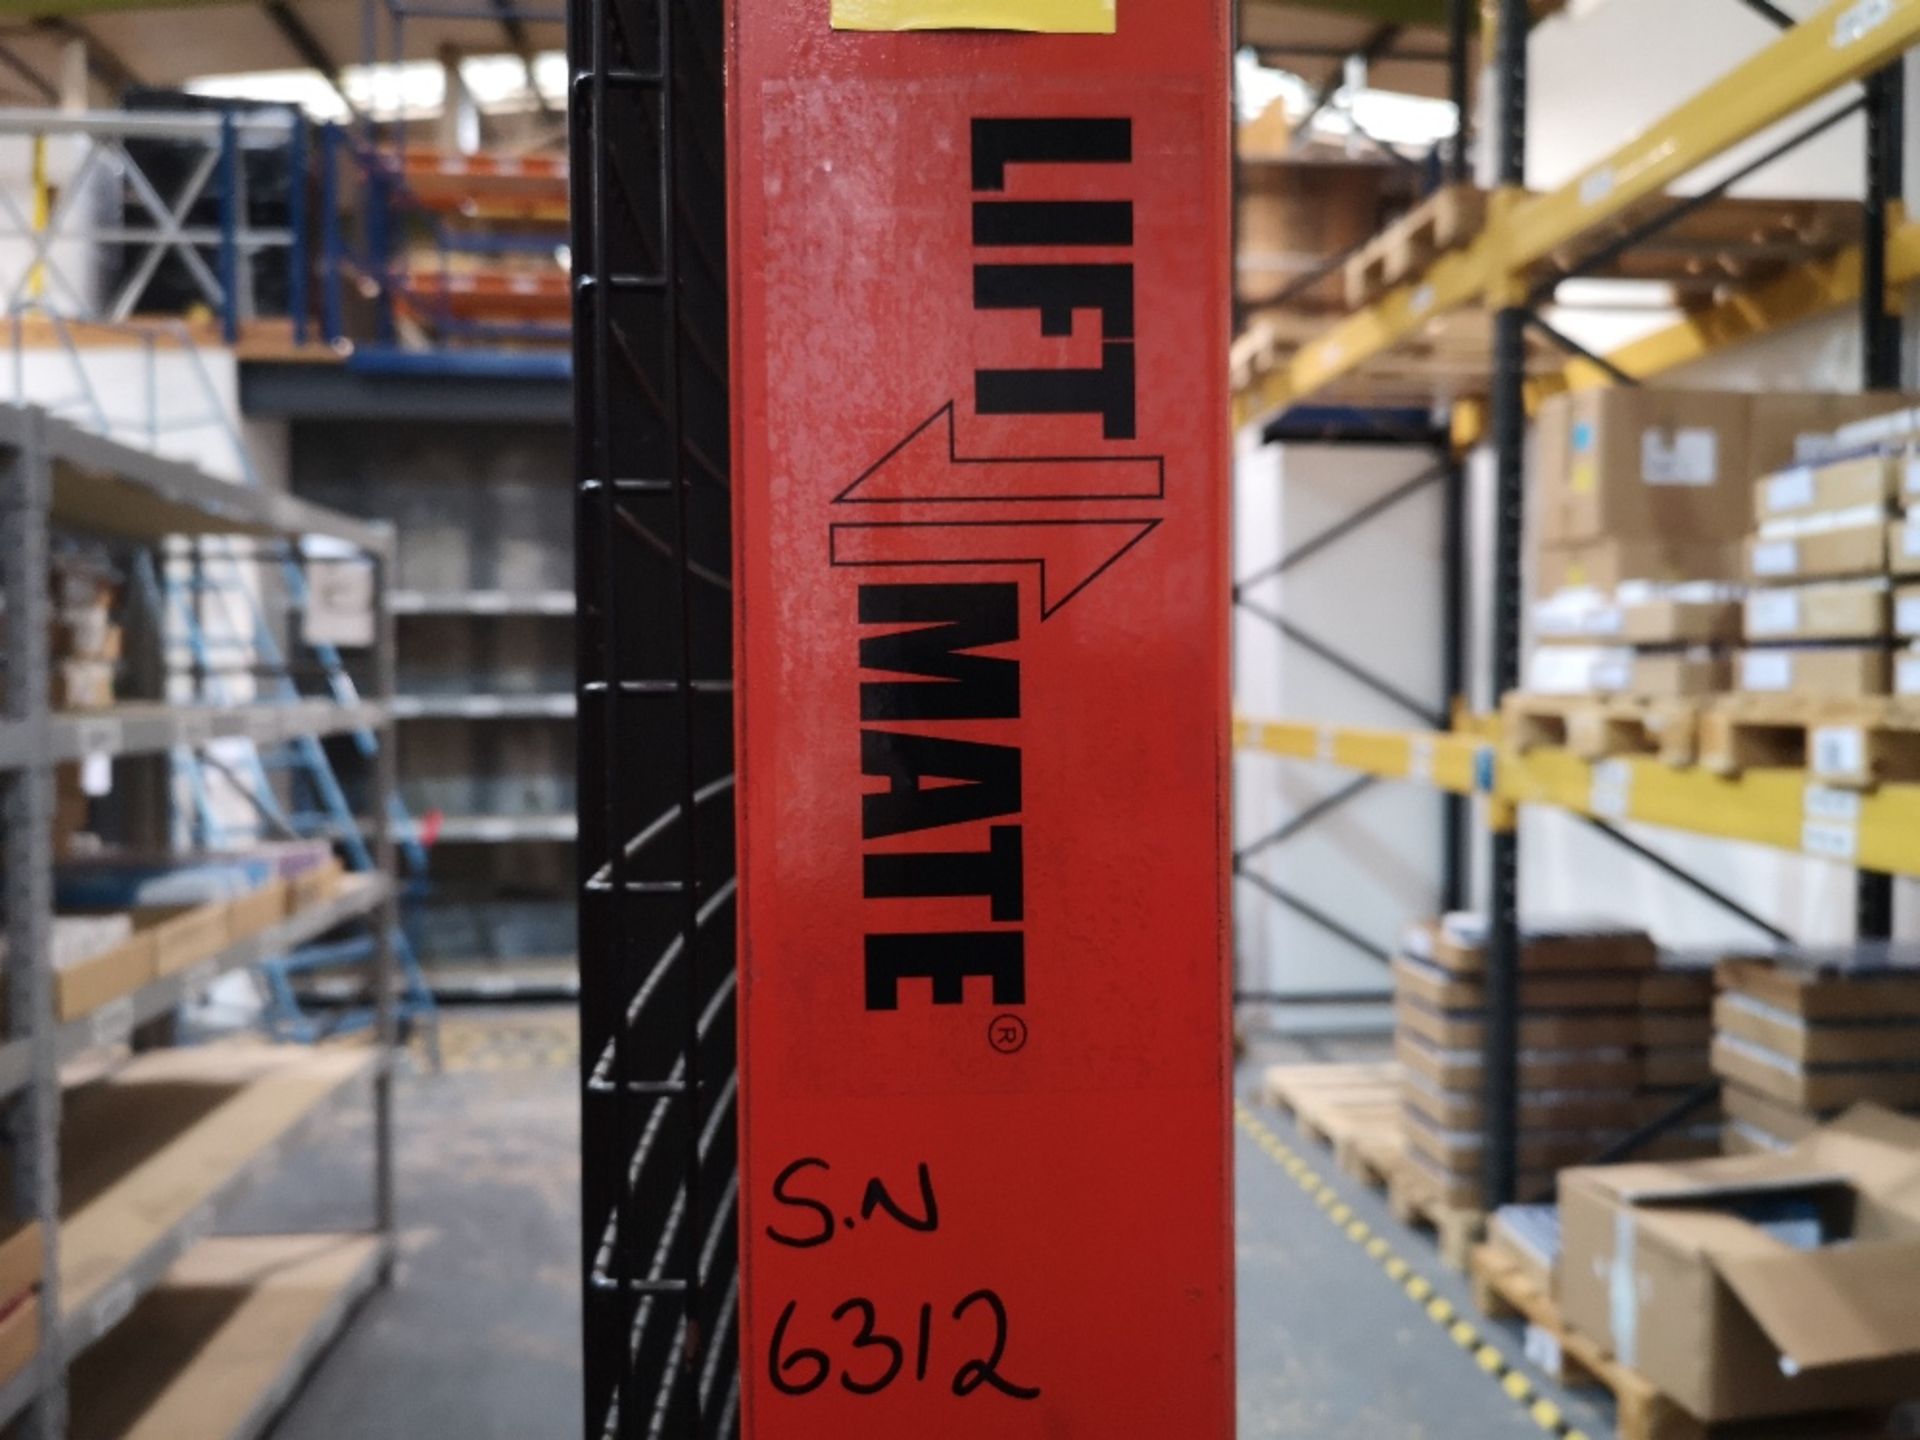 Liftmate electric lift pallet stacker 1000kg capacity 4.2m max height - Image 4 of 5